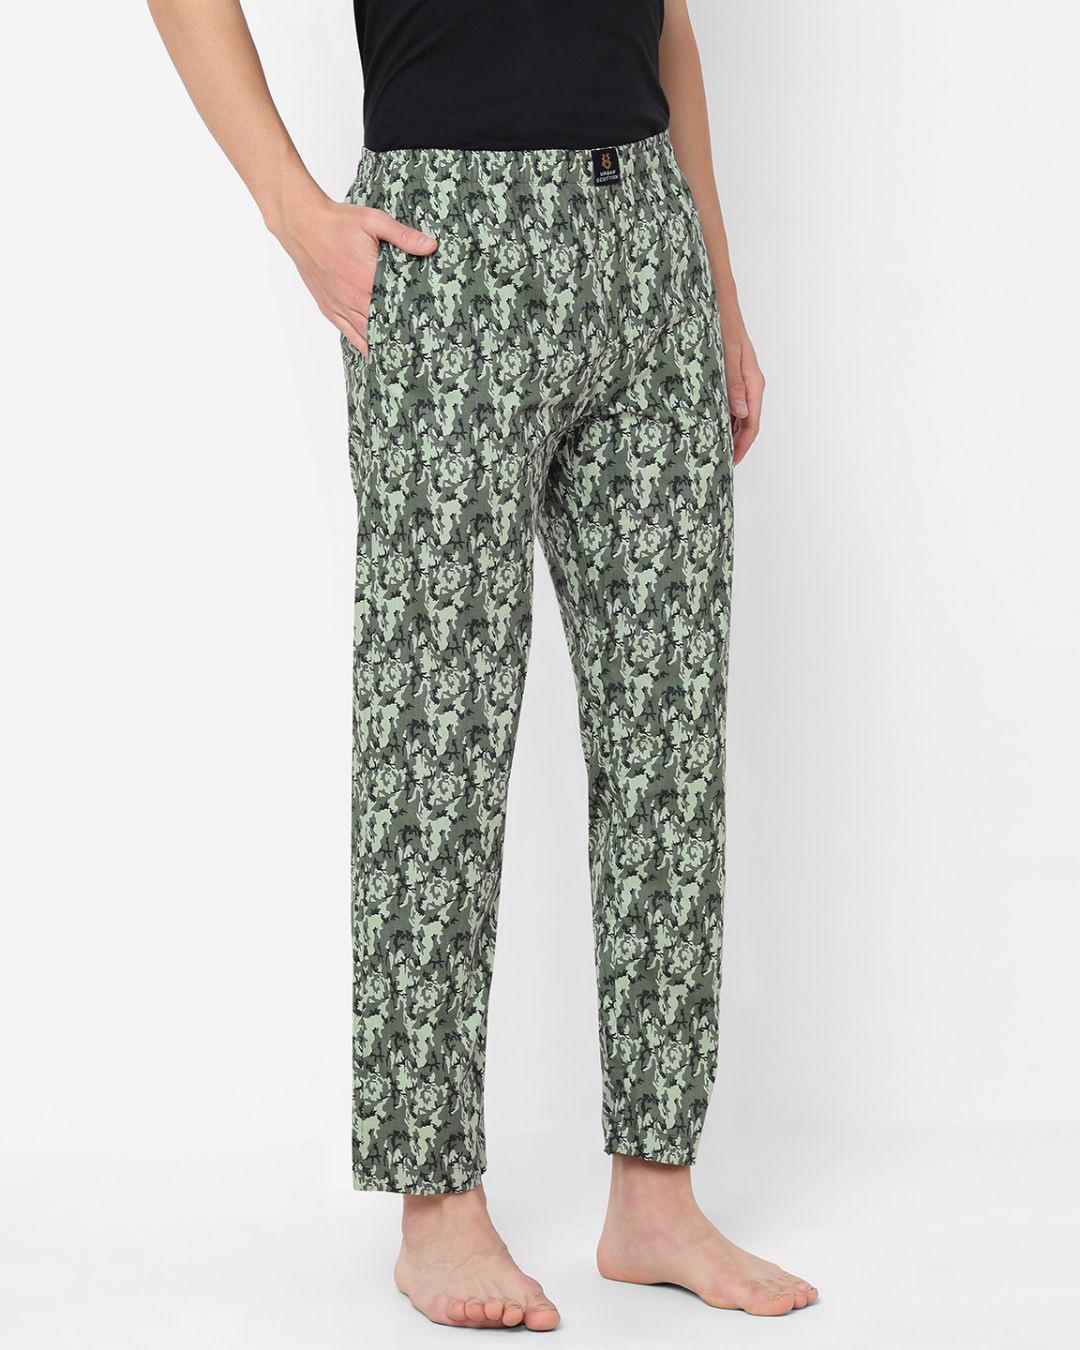 Shop Men's Green All Over Printed Cotton Lounge Pants-Back